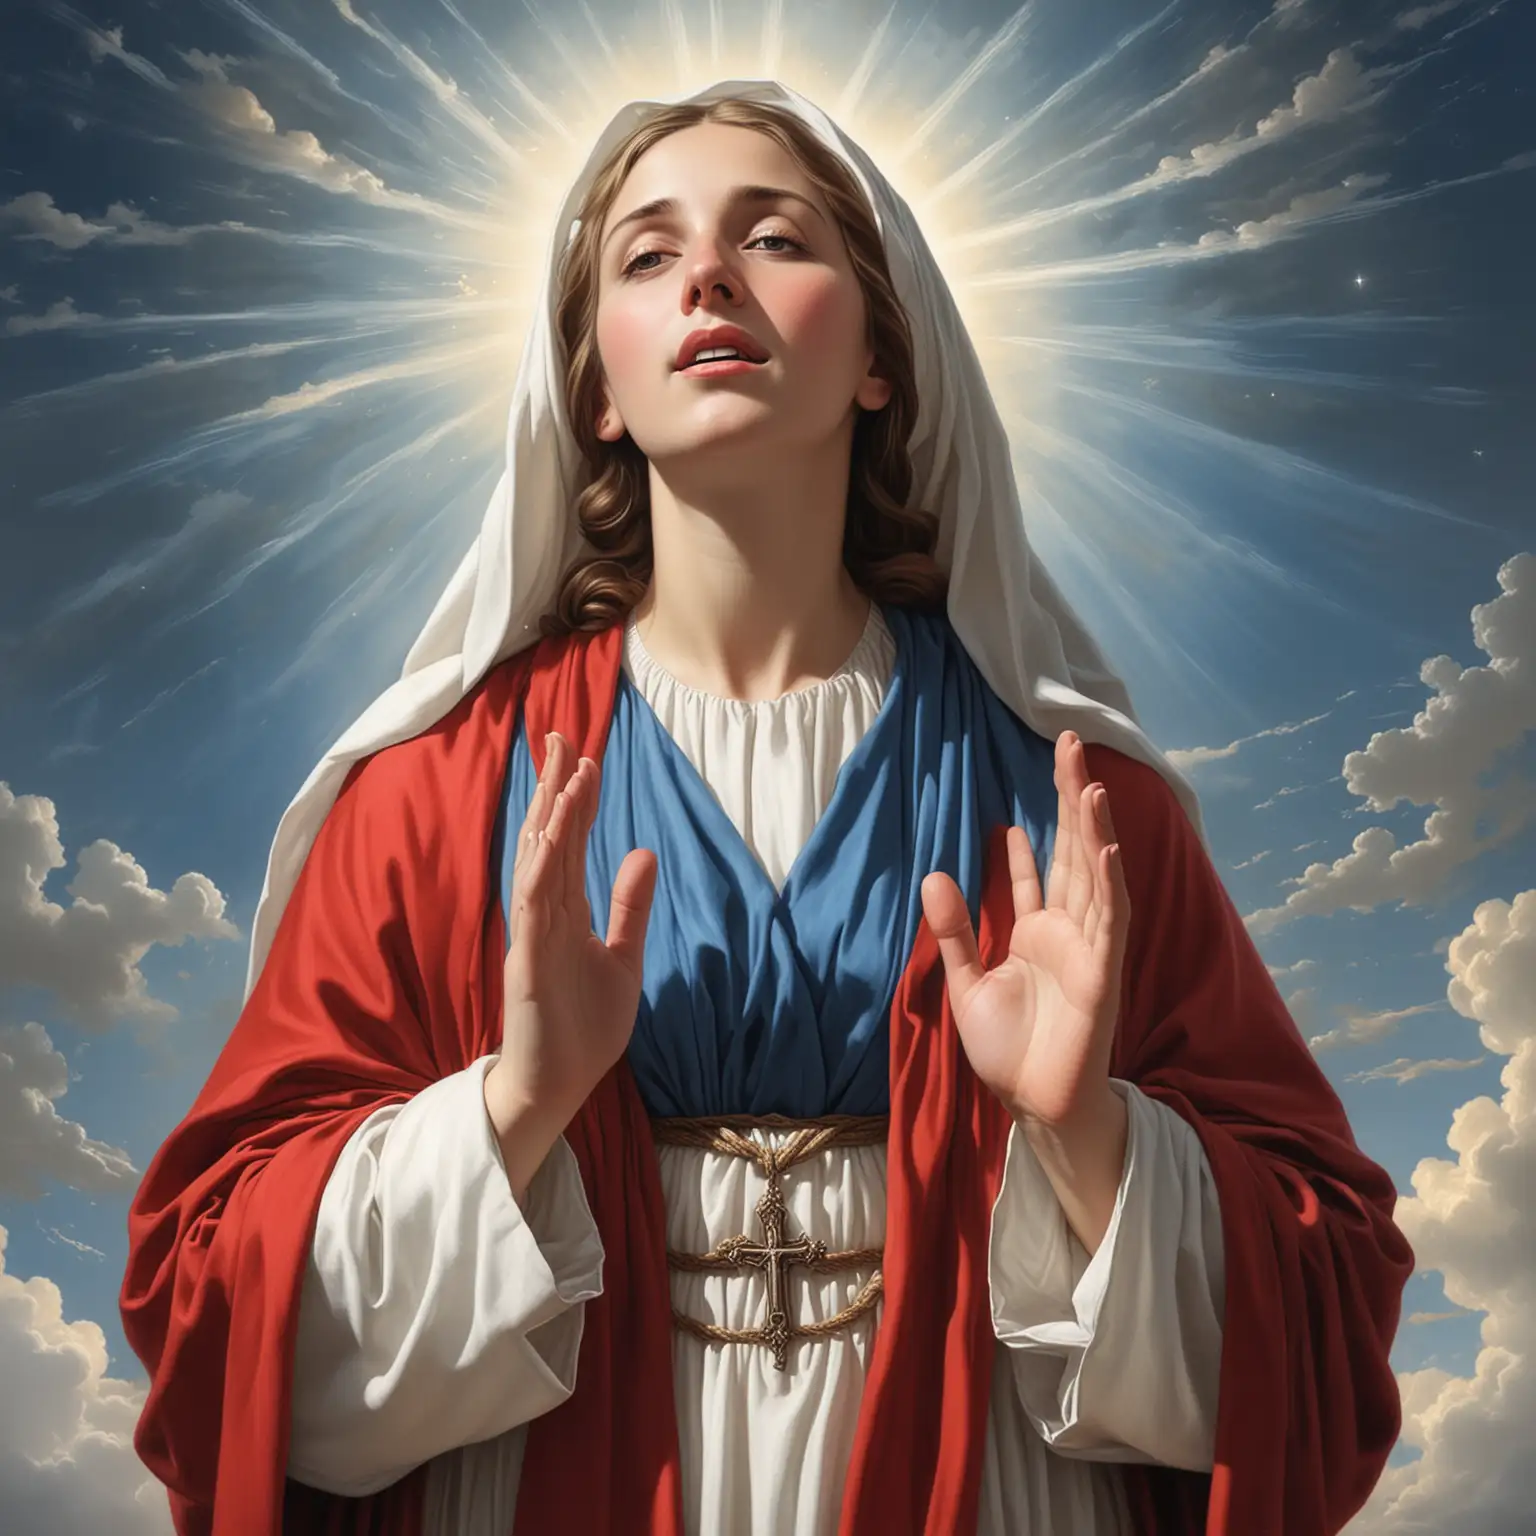 Virgin Mary in Red Dress and Blue Mantle with Raised Hands Religious Art Inspired by Giovanni Gasparro